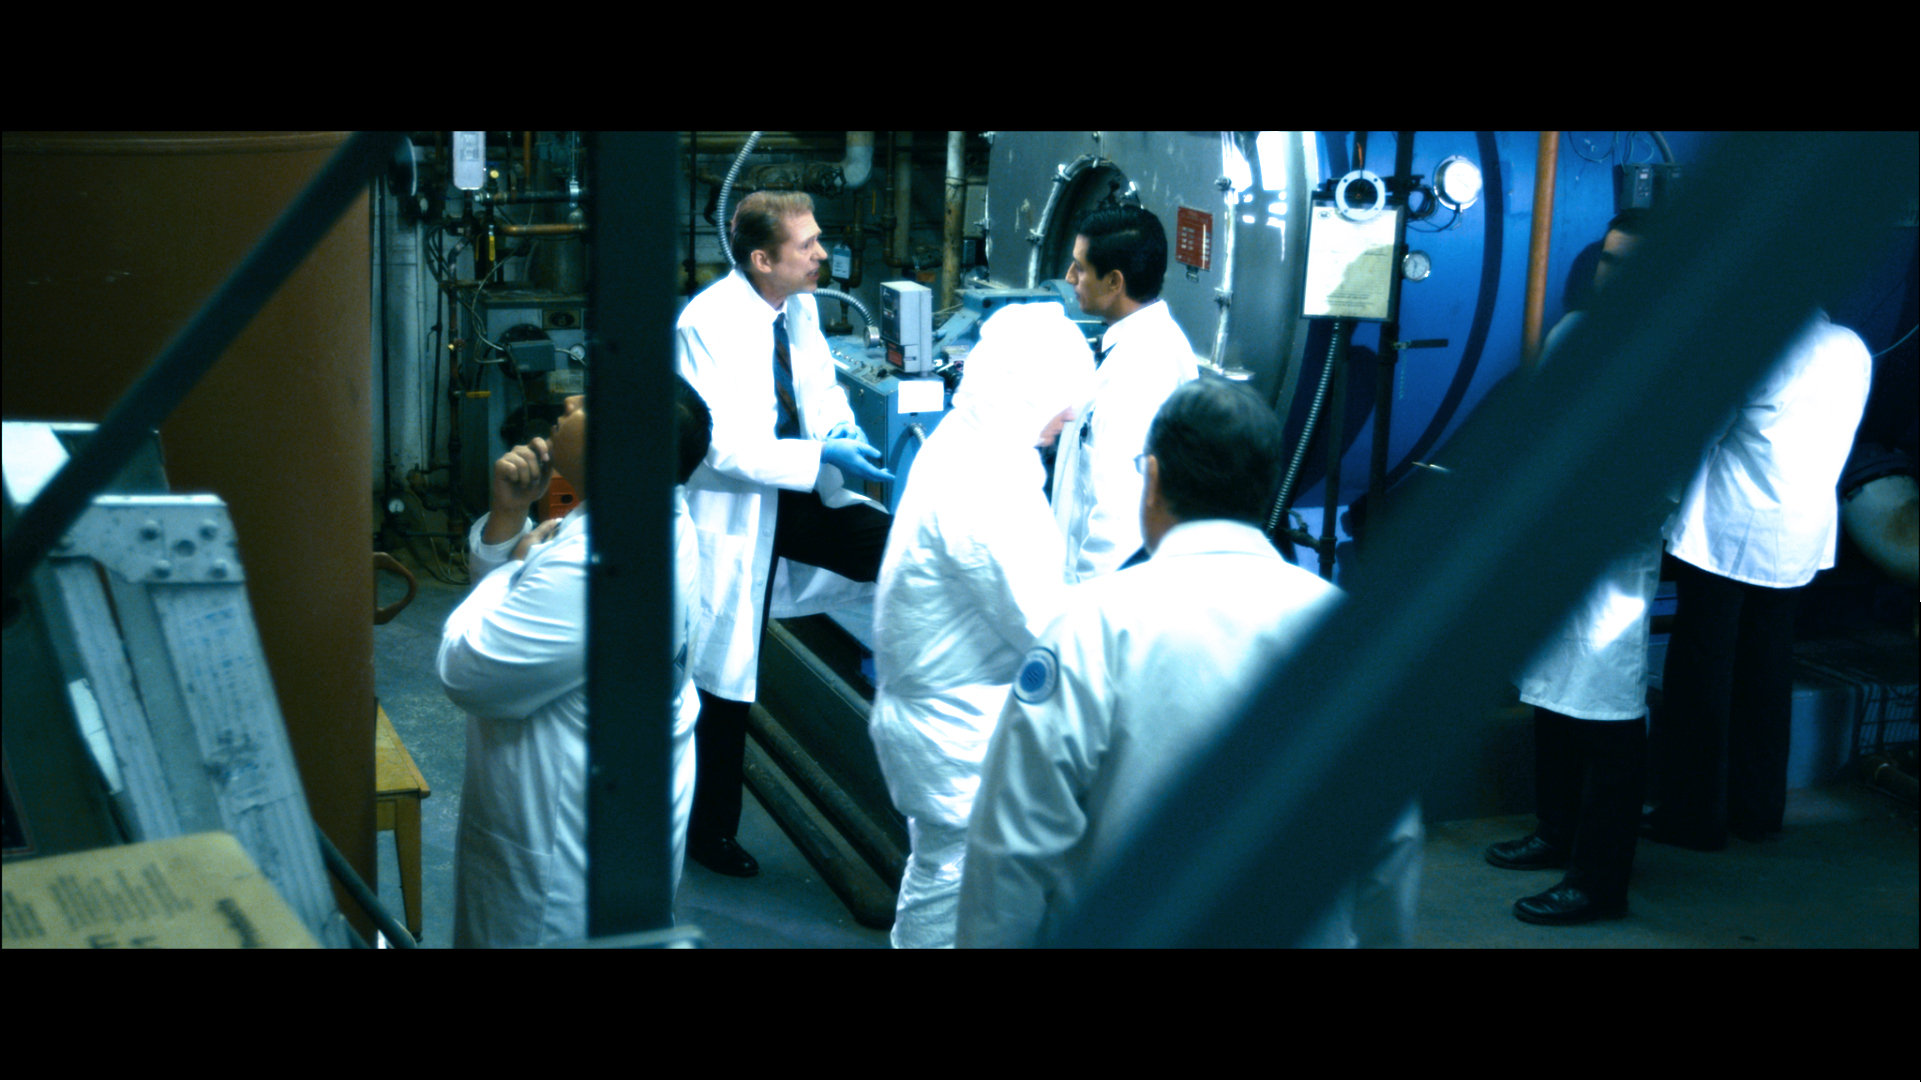 Dr. Greenglass (Allen Enlow) scolds Felix (Alex Kruz) for overlooking the little things as he holds up a filter responsible for altering the functionality of the machine. Marilyn - the nuclear reactor which Dr. Greenglass invented behind them. Several scientists and technicians in hazmat and radioactive protective gear busily whirr around their daily duties.